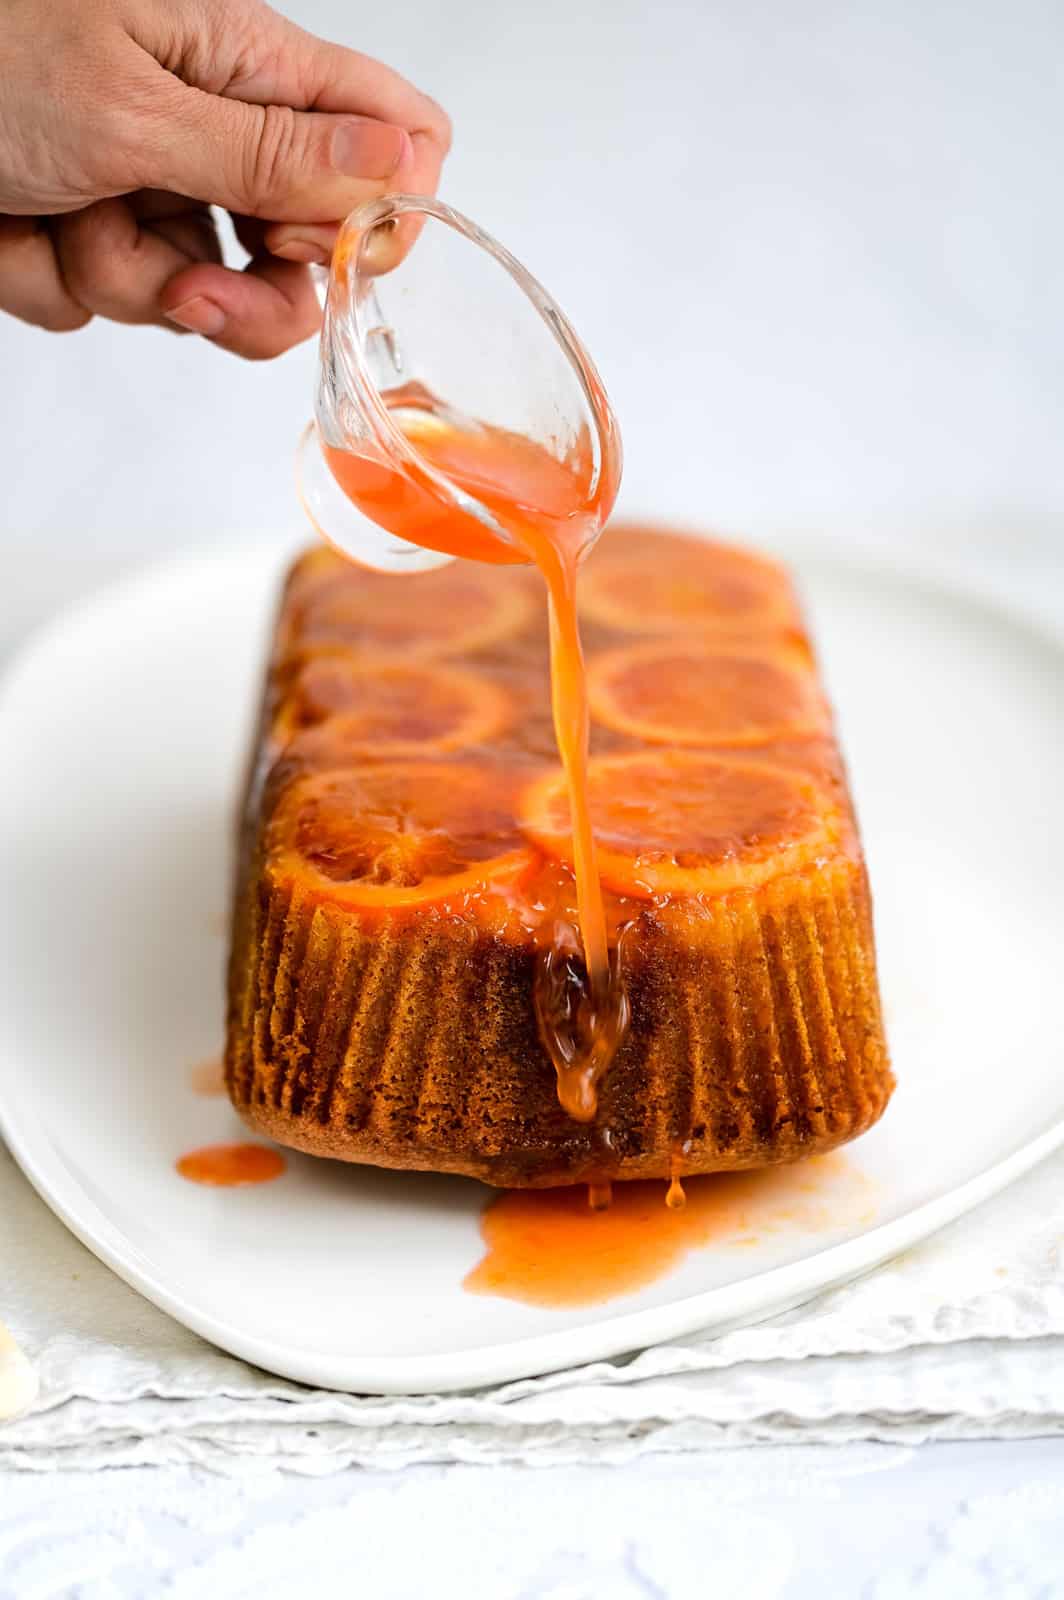 Orange Upside Down Cake drizzled with orange syrup